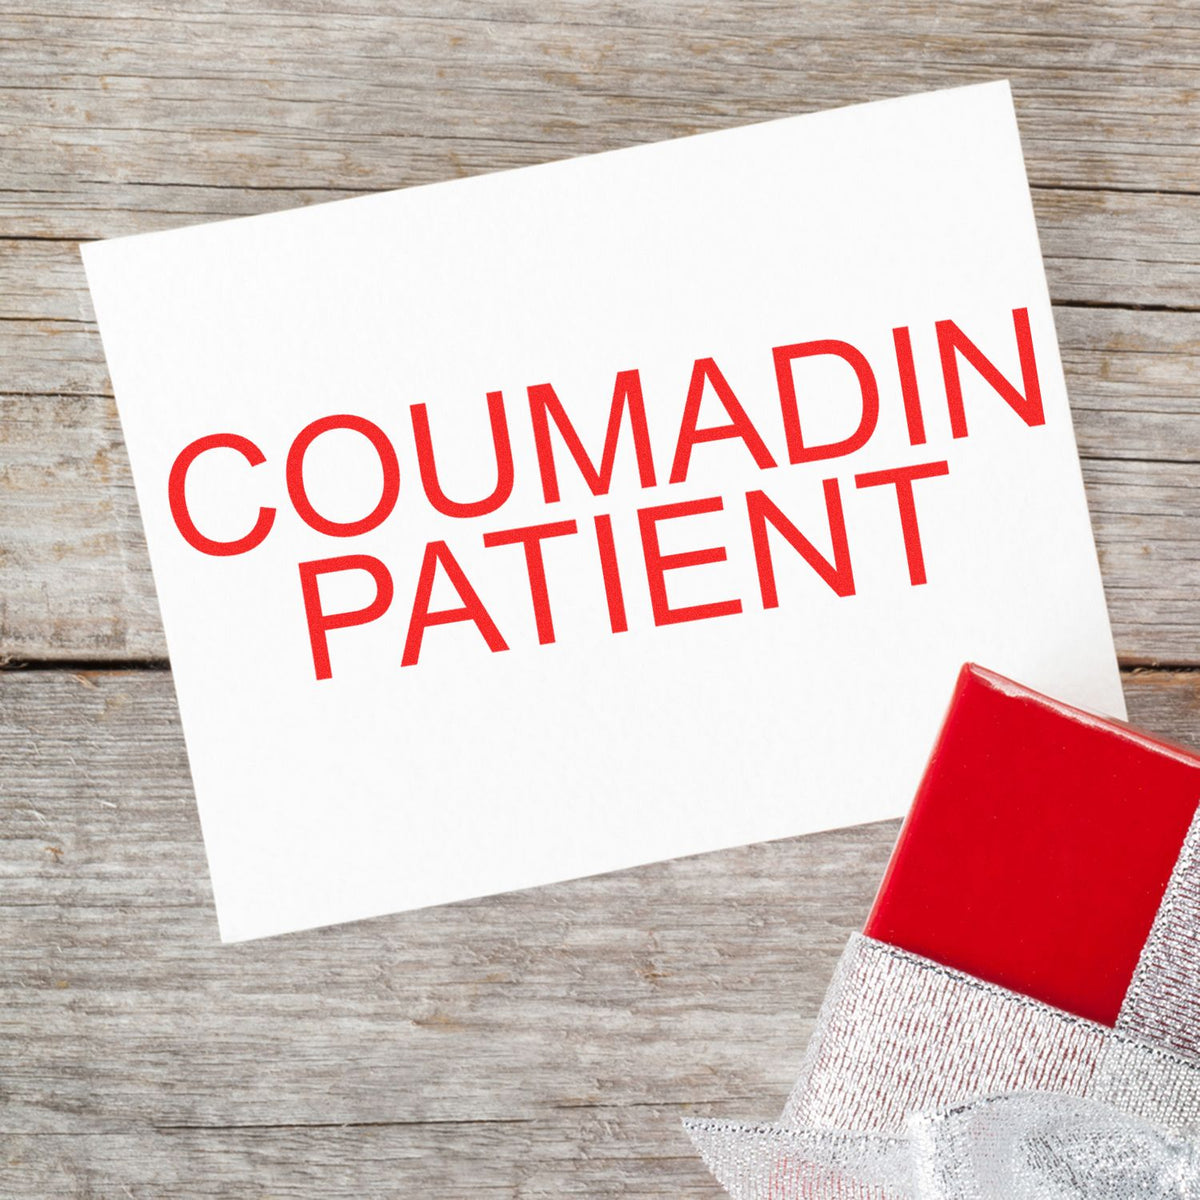 Coumadin Patient Rubber Stamp In Use Photo